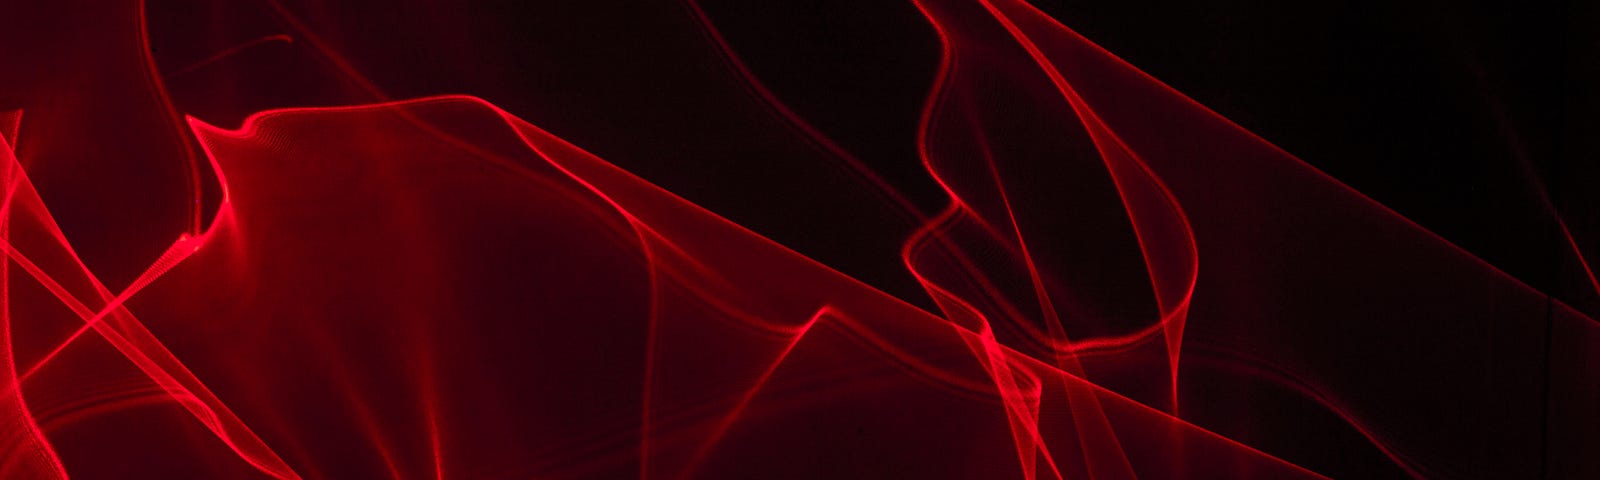 red virbrational waves against a black background